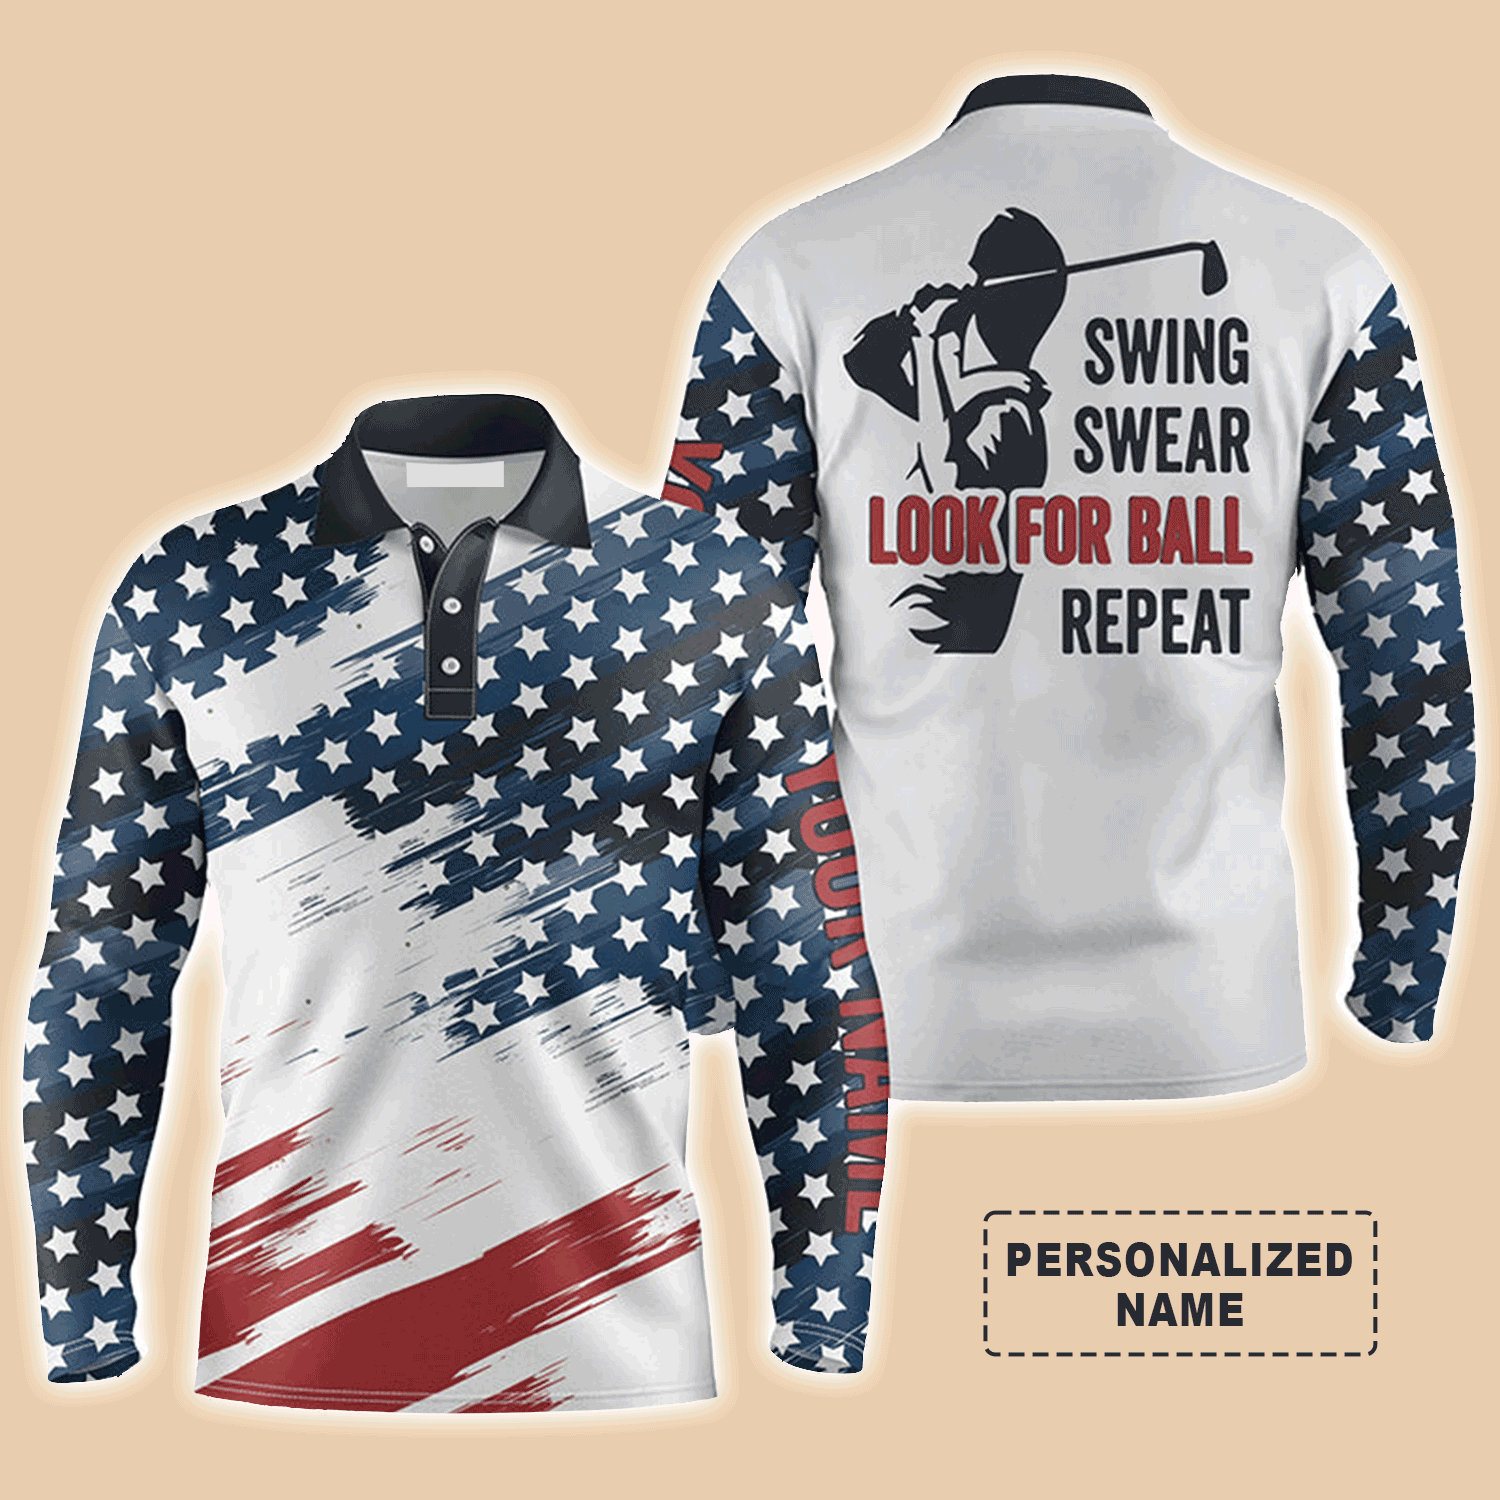 Personalized Name American Flag Golf Long Sleeve Polo Shirt/ Swing Swear Look For Ball Repeat 3D Shirt/ Gift For Men